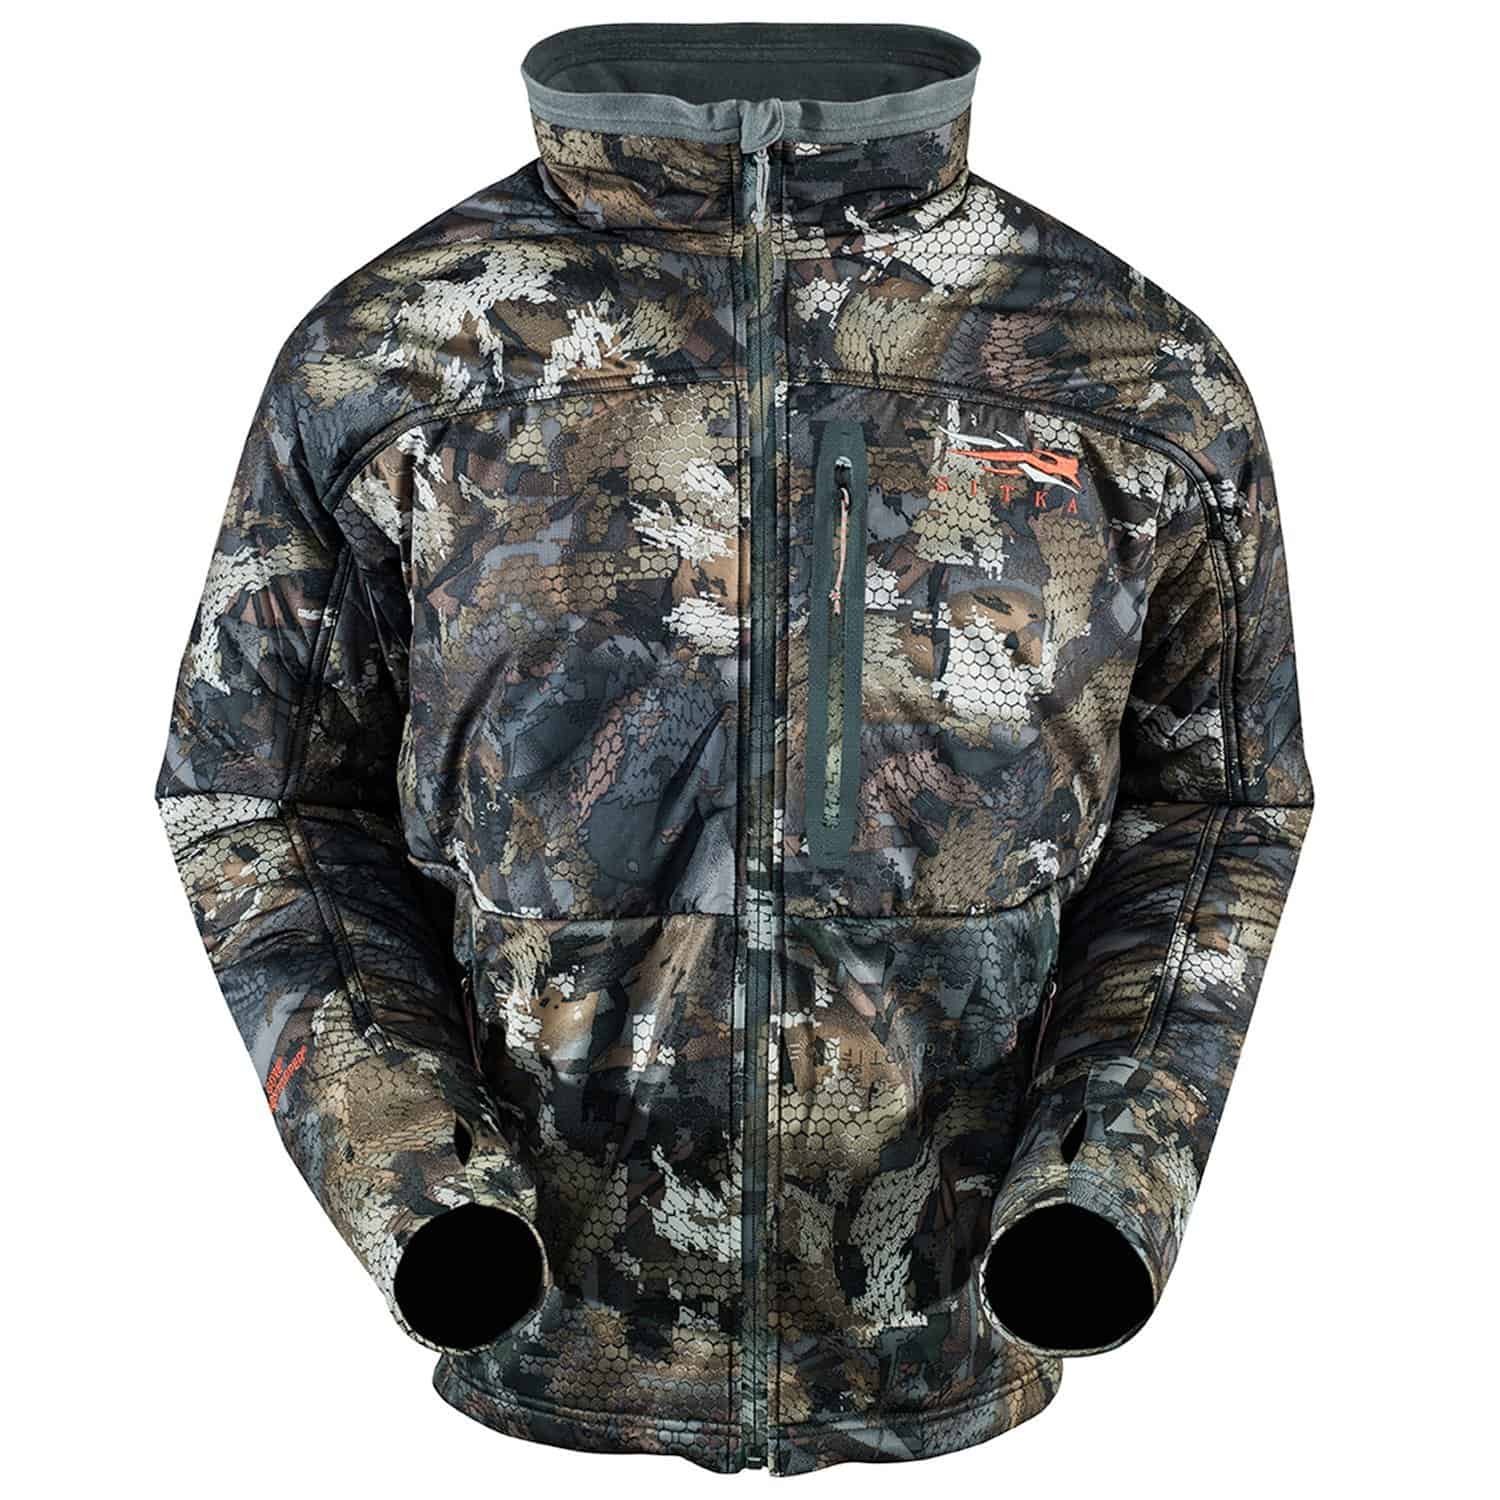 Best Waterproof Duck Hunting Jacket Reviews of 2021 Catch Them Easy